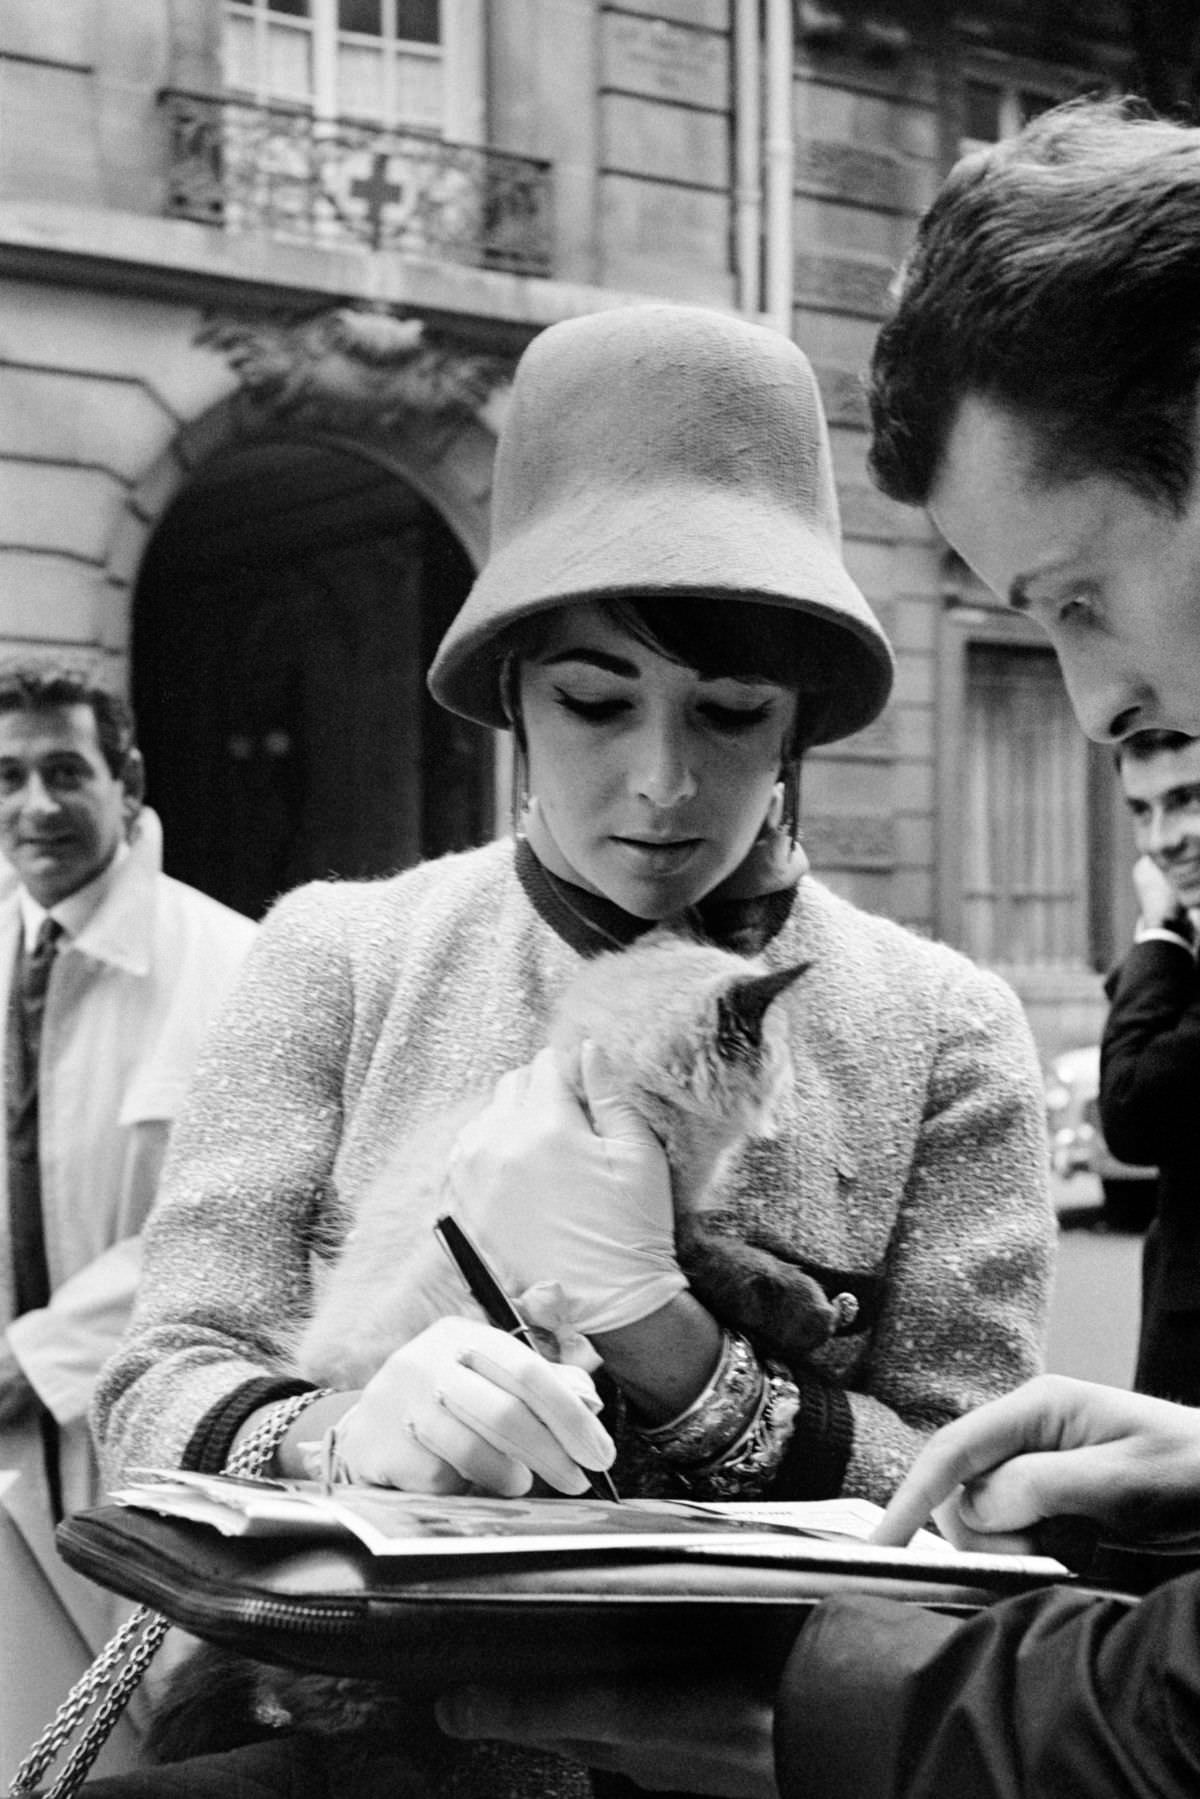 While returning to Paris from a trip to Russia in 1961, Elizabeth Taylor proved herself capable of simultaneously signing an autograph and stroking the nape of a mysterious cat.